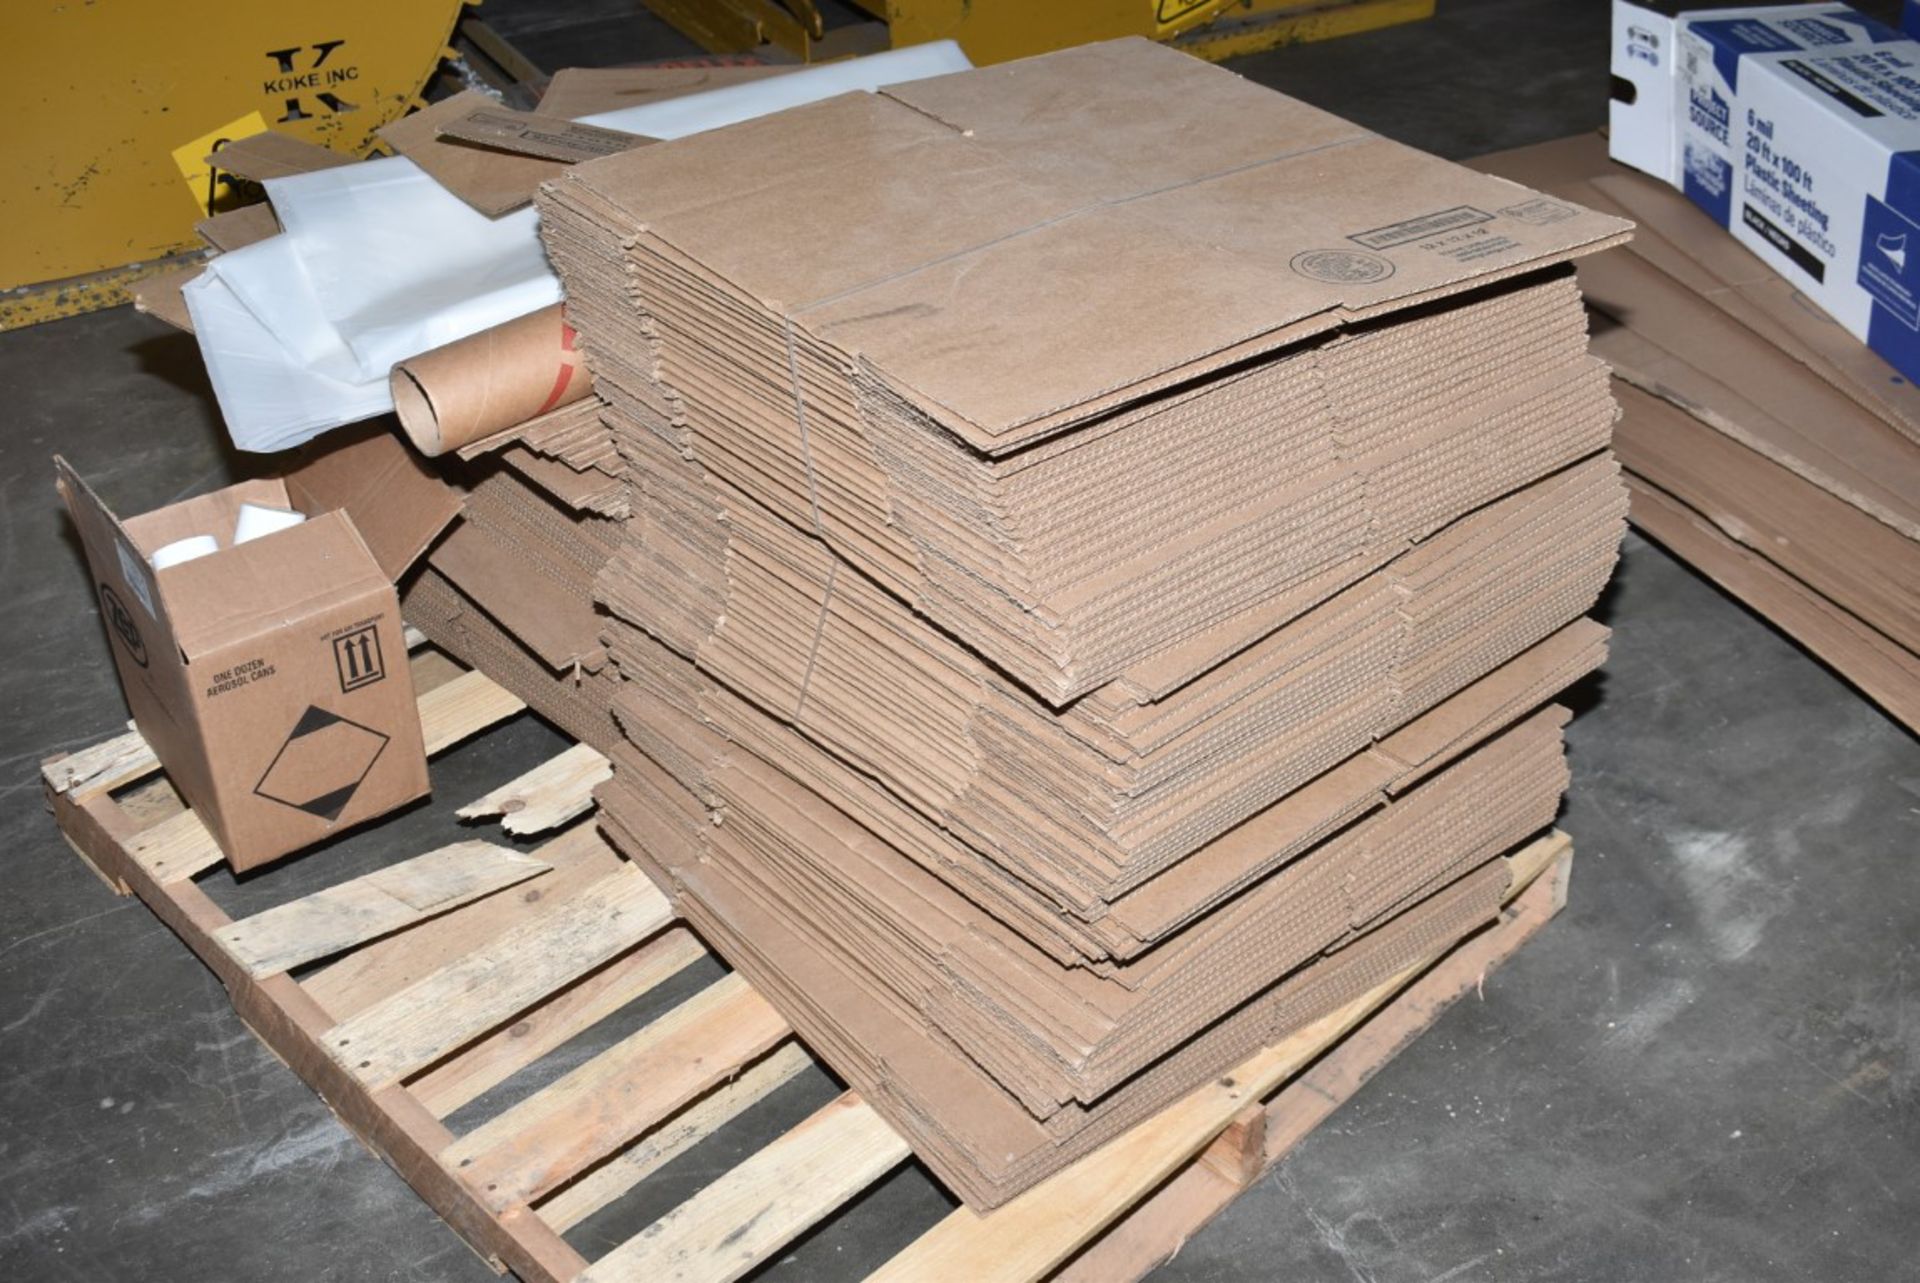 LOT/ PACKAGING SUPPLIES - INCLUDING PLASTIC SHEETING, CORRUGATED CARDBOARD SHIPPING CARTONS [RIGGING - Image 3 of 6